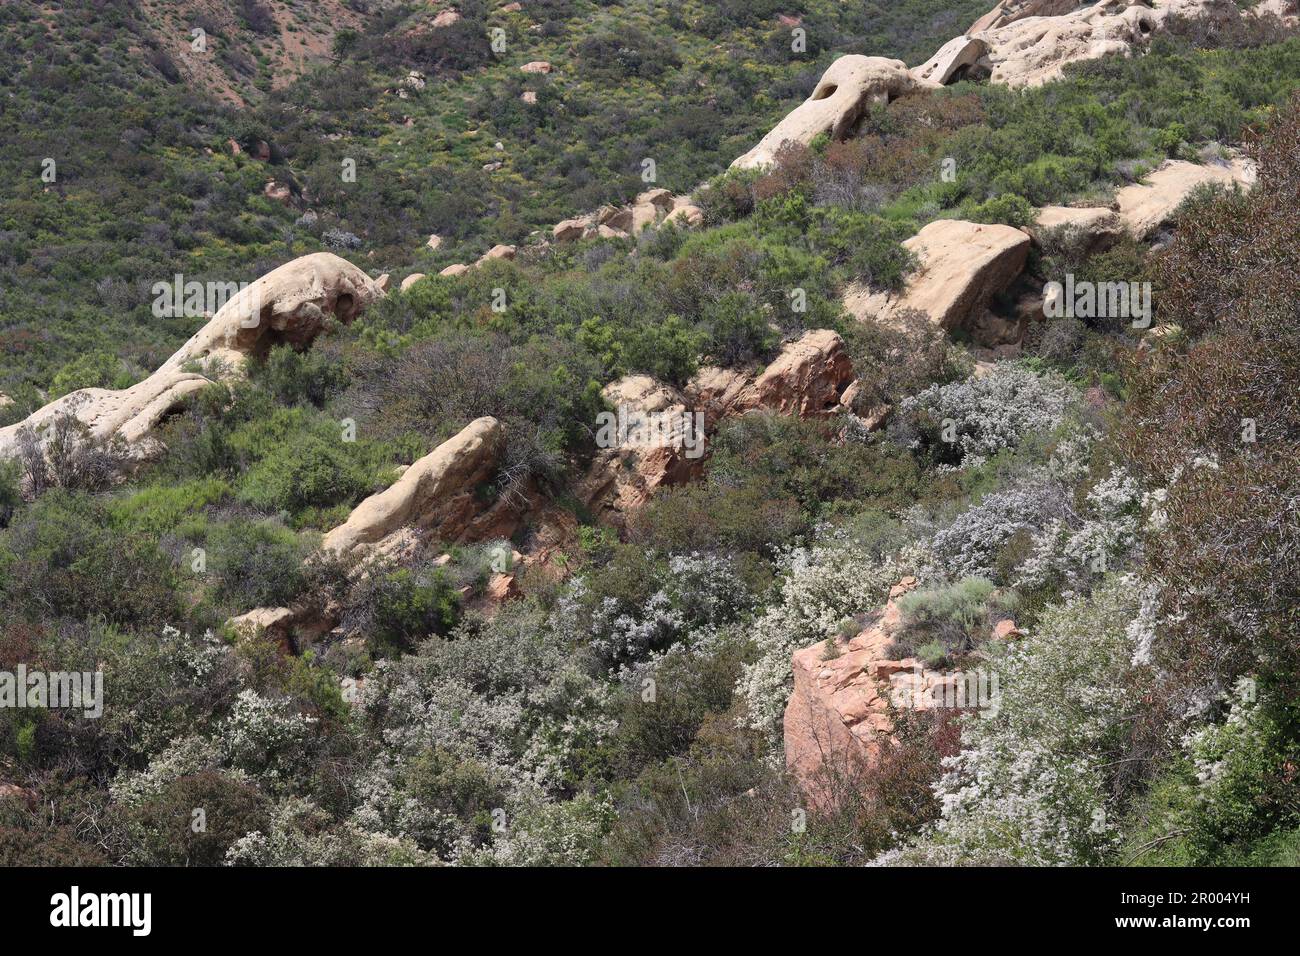 Springtime blooms awaken in the Elfin Forest, also known as Chaparral, a biodiversity hotspot worthy of protection in the Santa Monica Mountains. Stock Photo